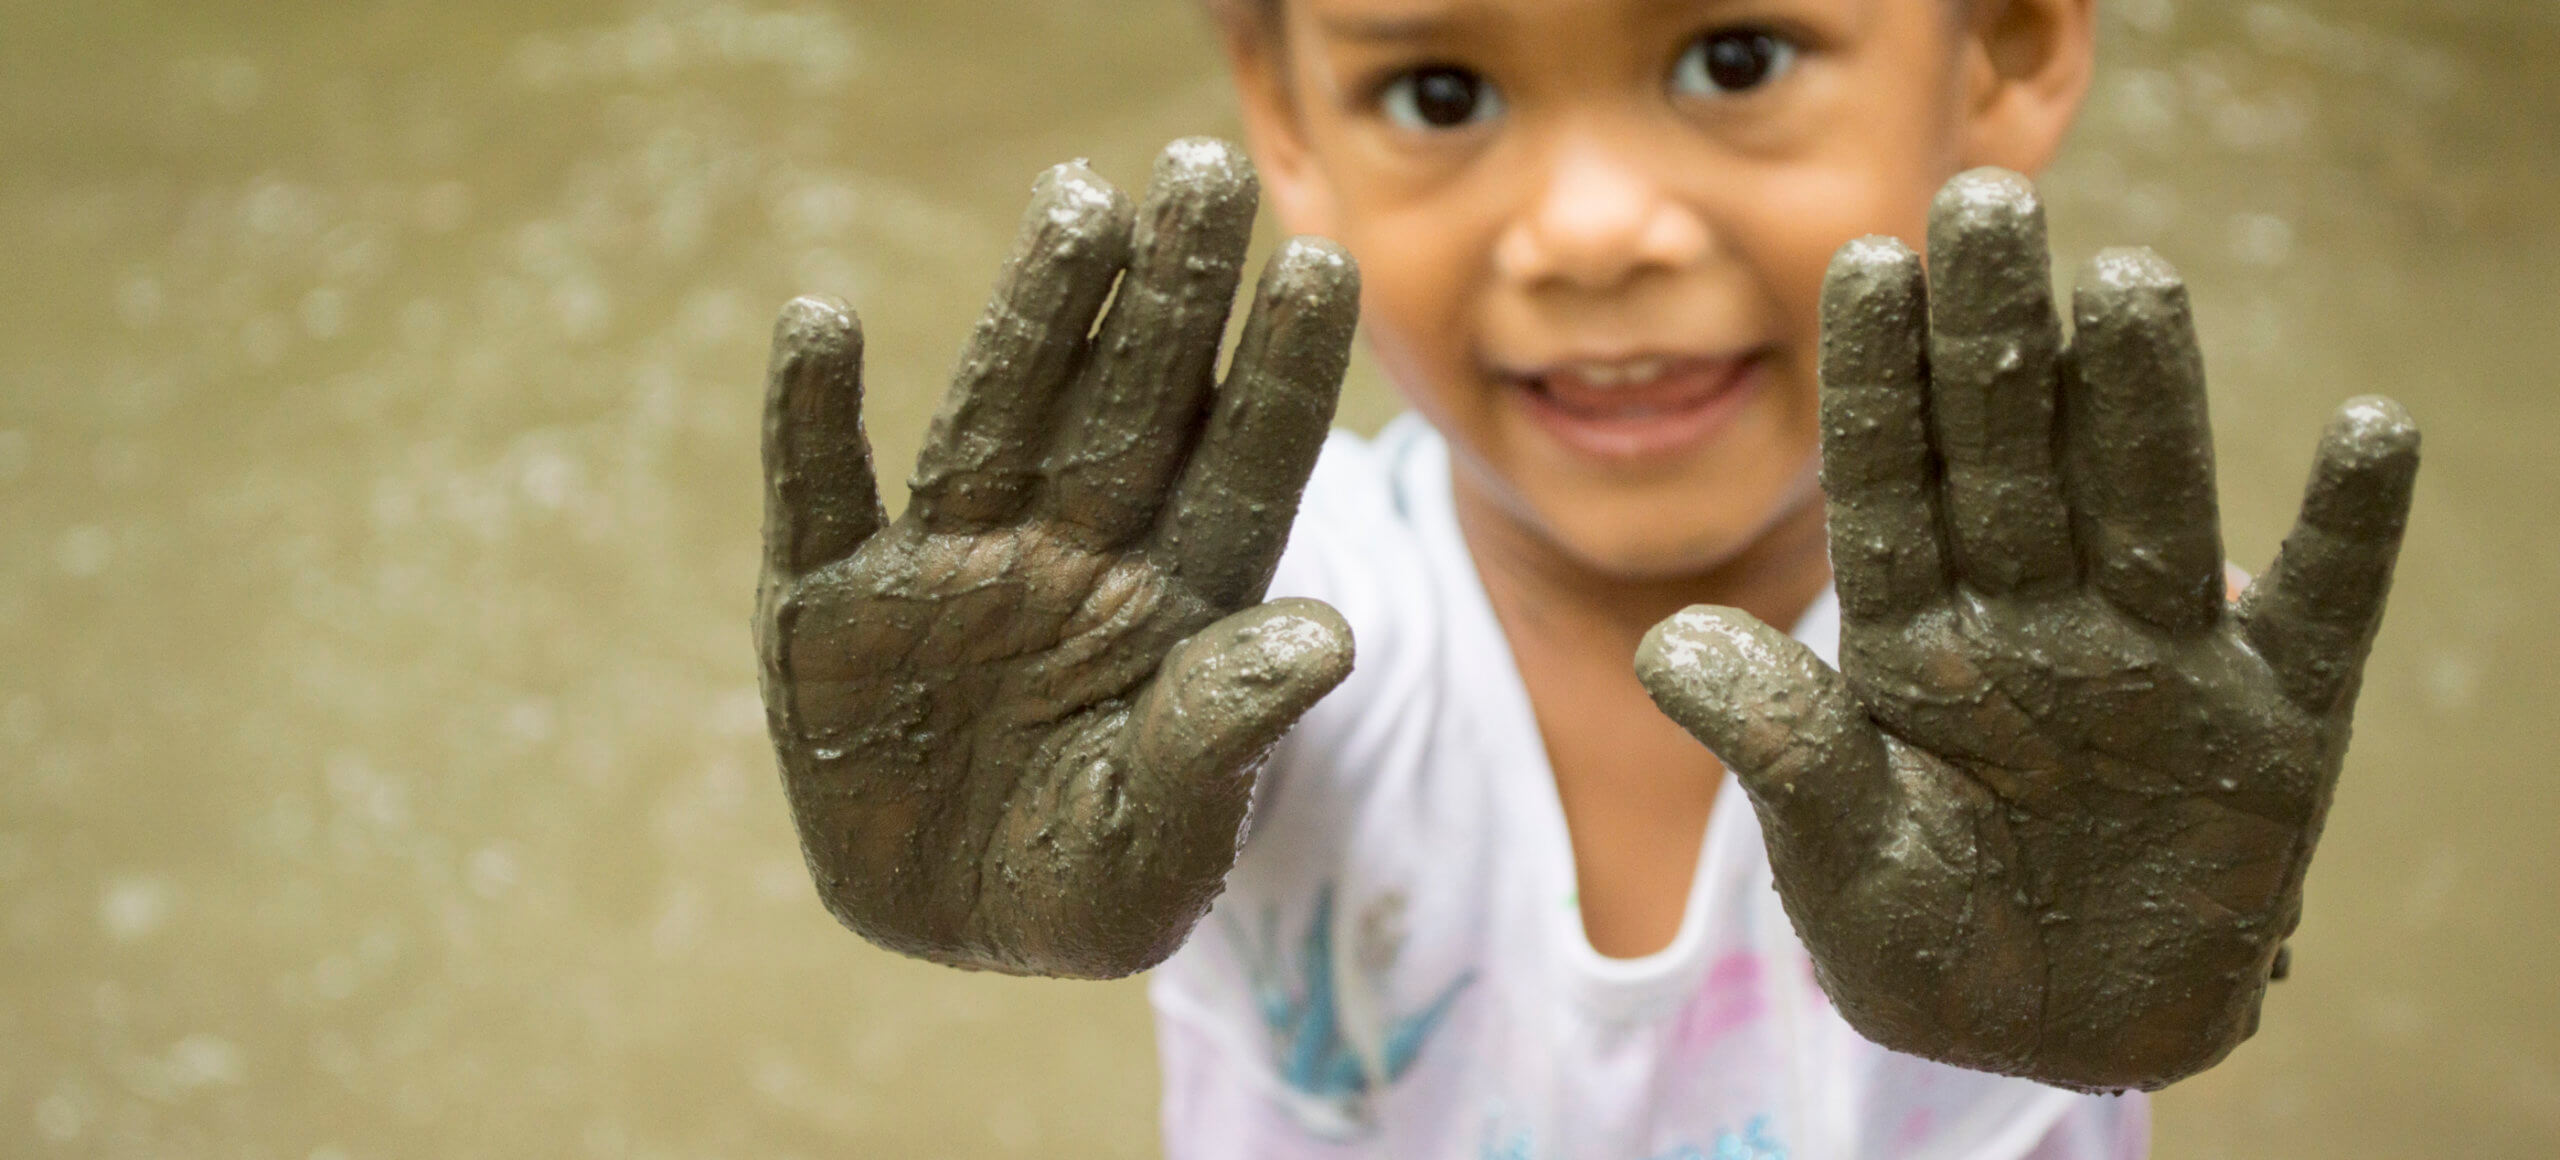 A child smiles in front of water while holding up her muddly palms.